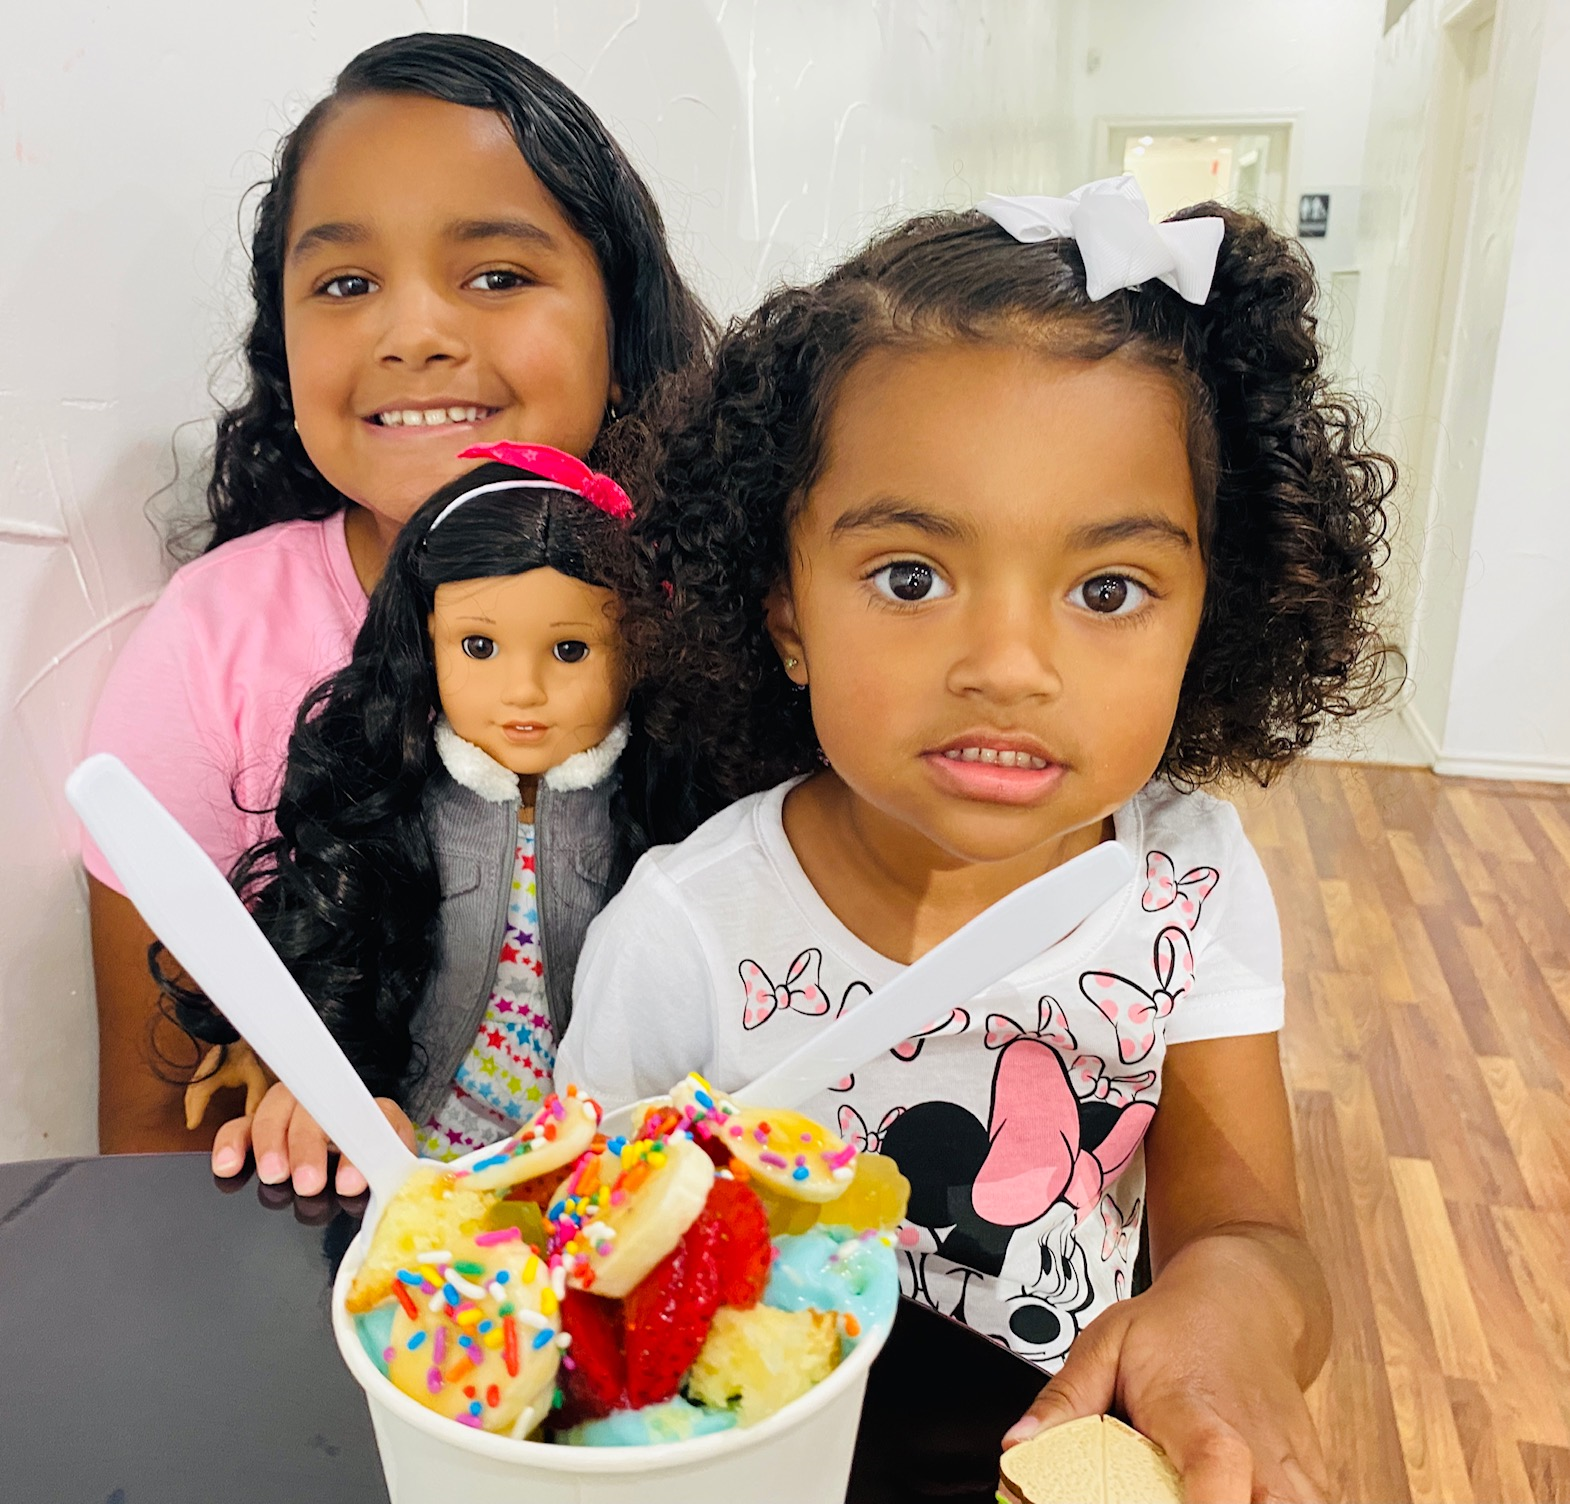 Young Kaehlani and KayKay join their doll for a yummy fruit-topped ice cream treat in Irving.